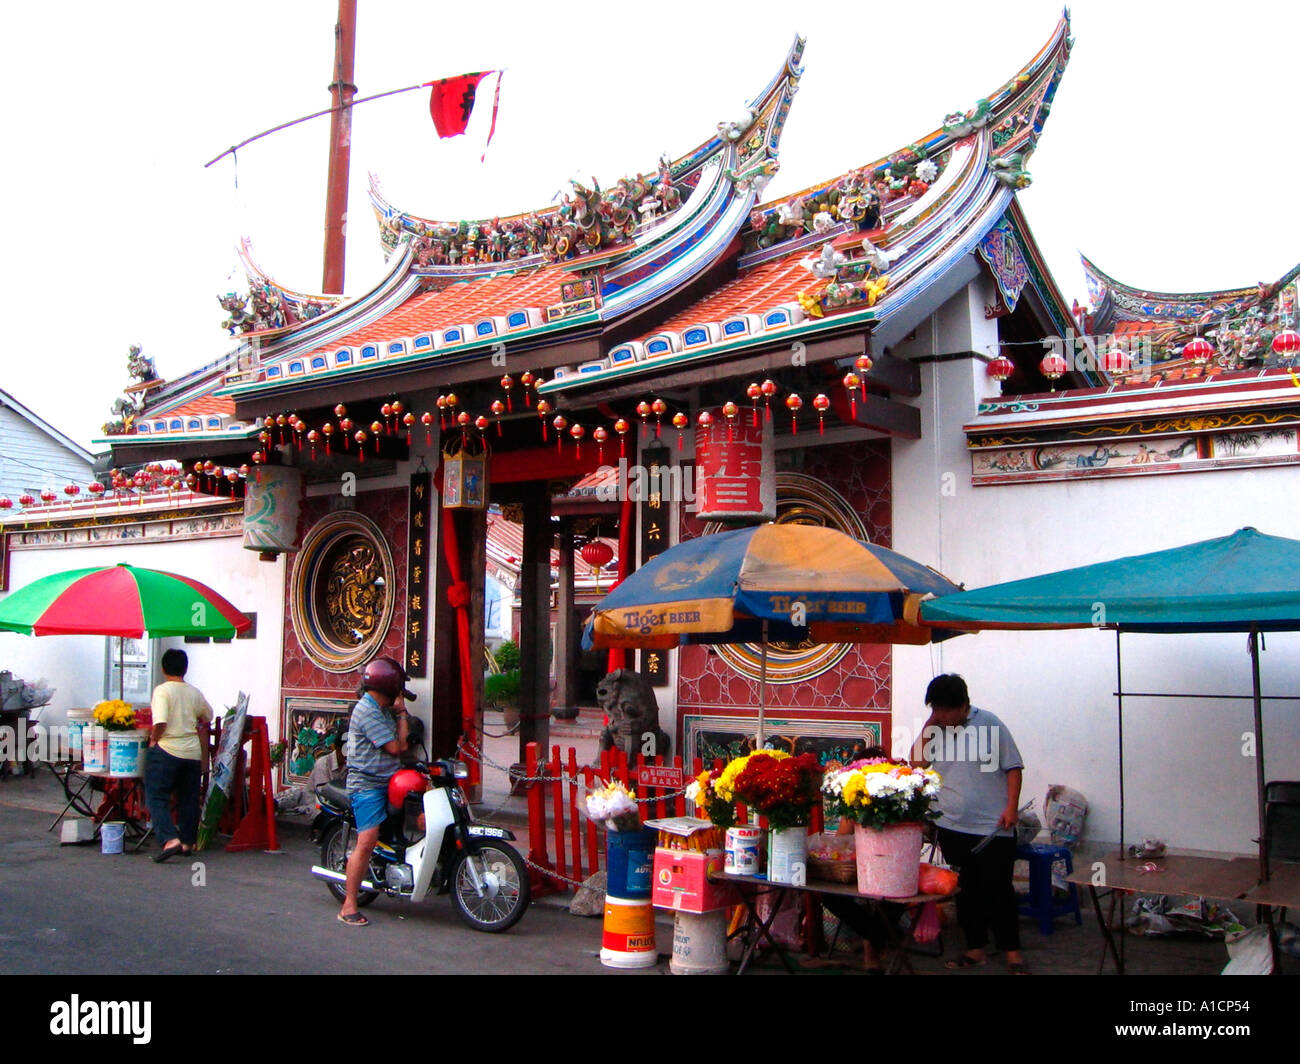 Oldest Chinese temple in Malaysia 17th century Cheng Hoon Teng Temple Chinatown Melaka Stock Photo